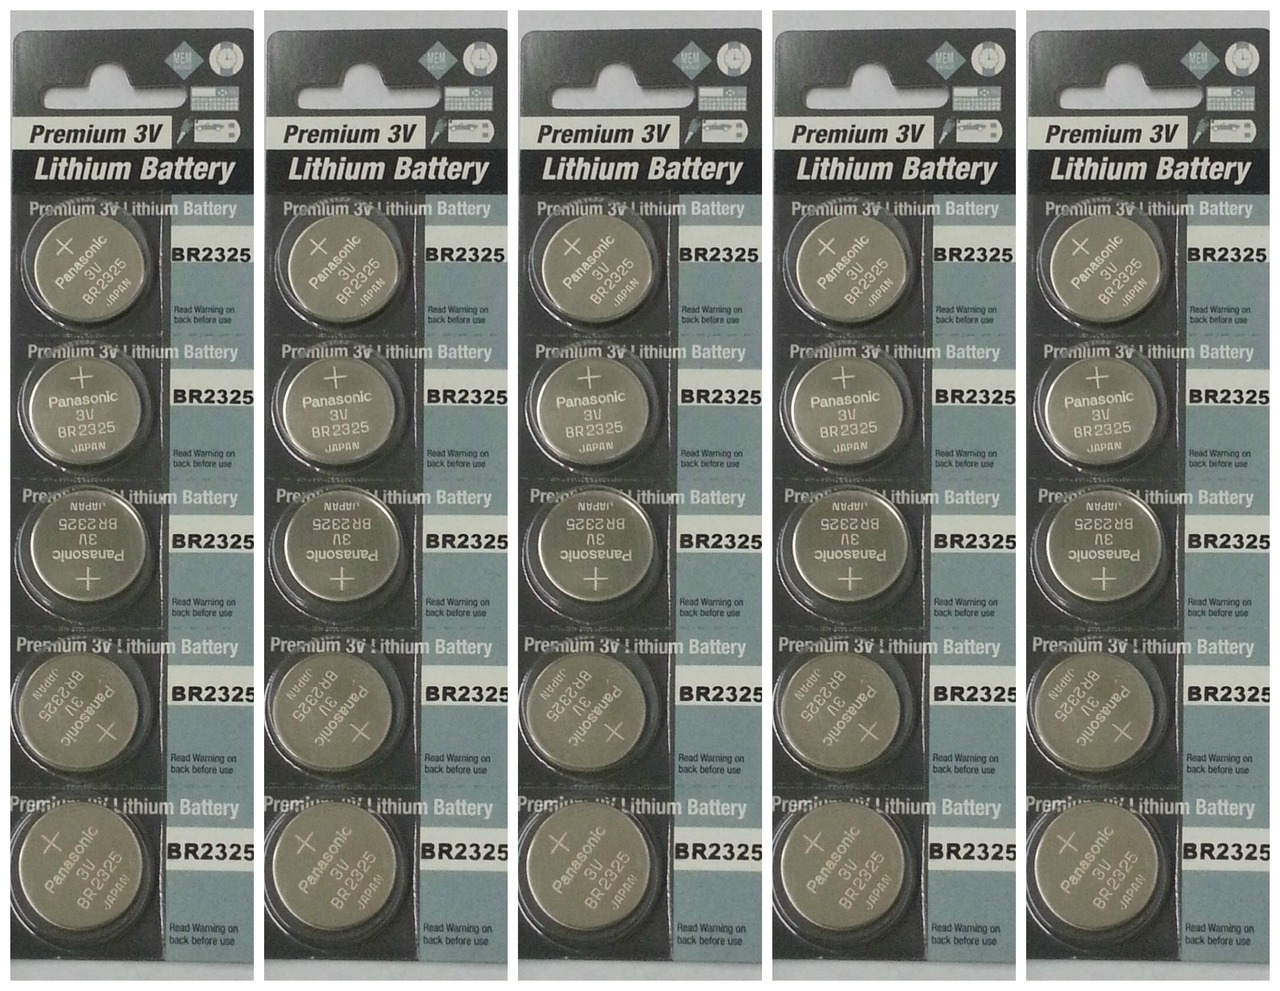 Panasonic BR2325 3V Lithium Coin Battery - 25 Pack + FREE SHIPPING!